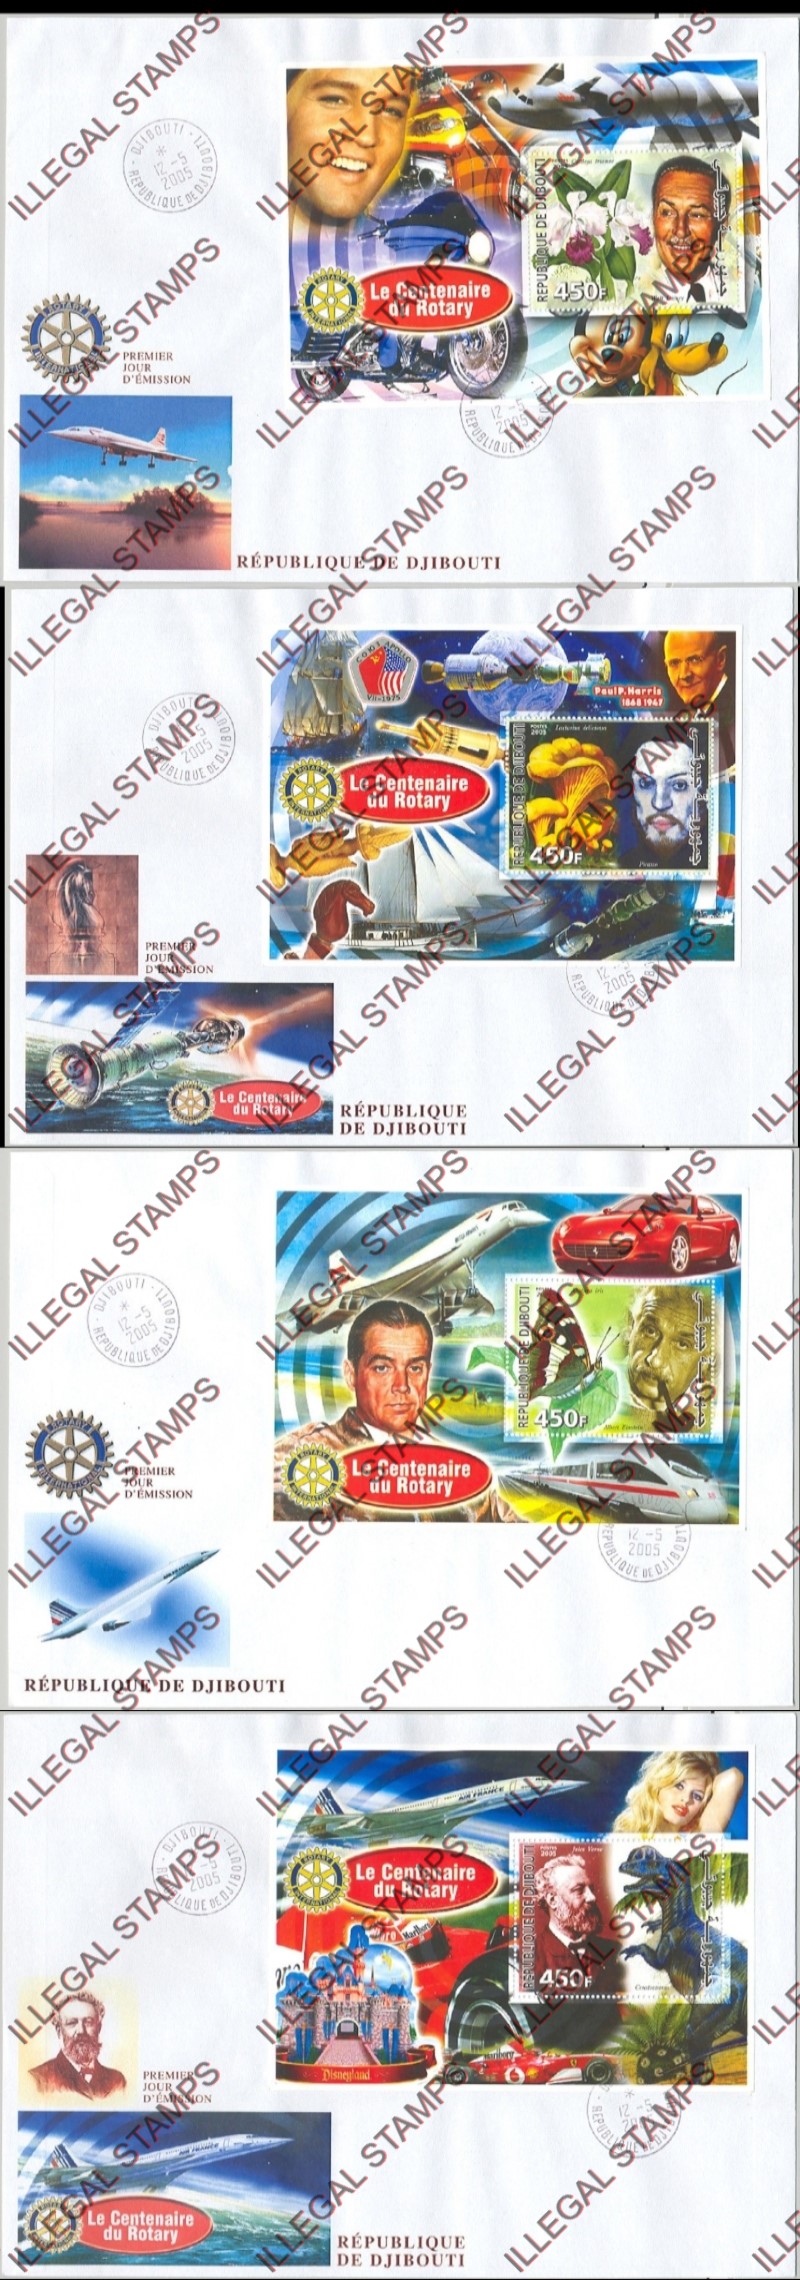 Djibouti 2005 Centenary of Rotary International Illegal Stamp Souvenir Sheets on Bogus First Day Covers